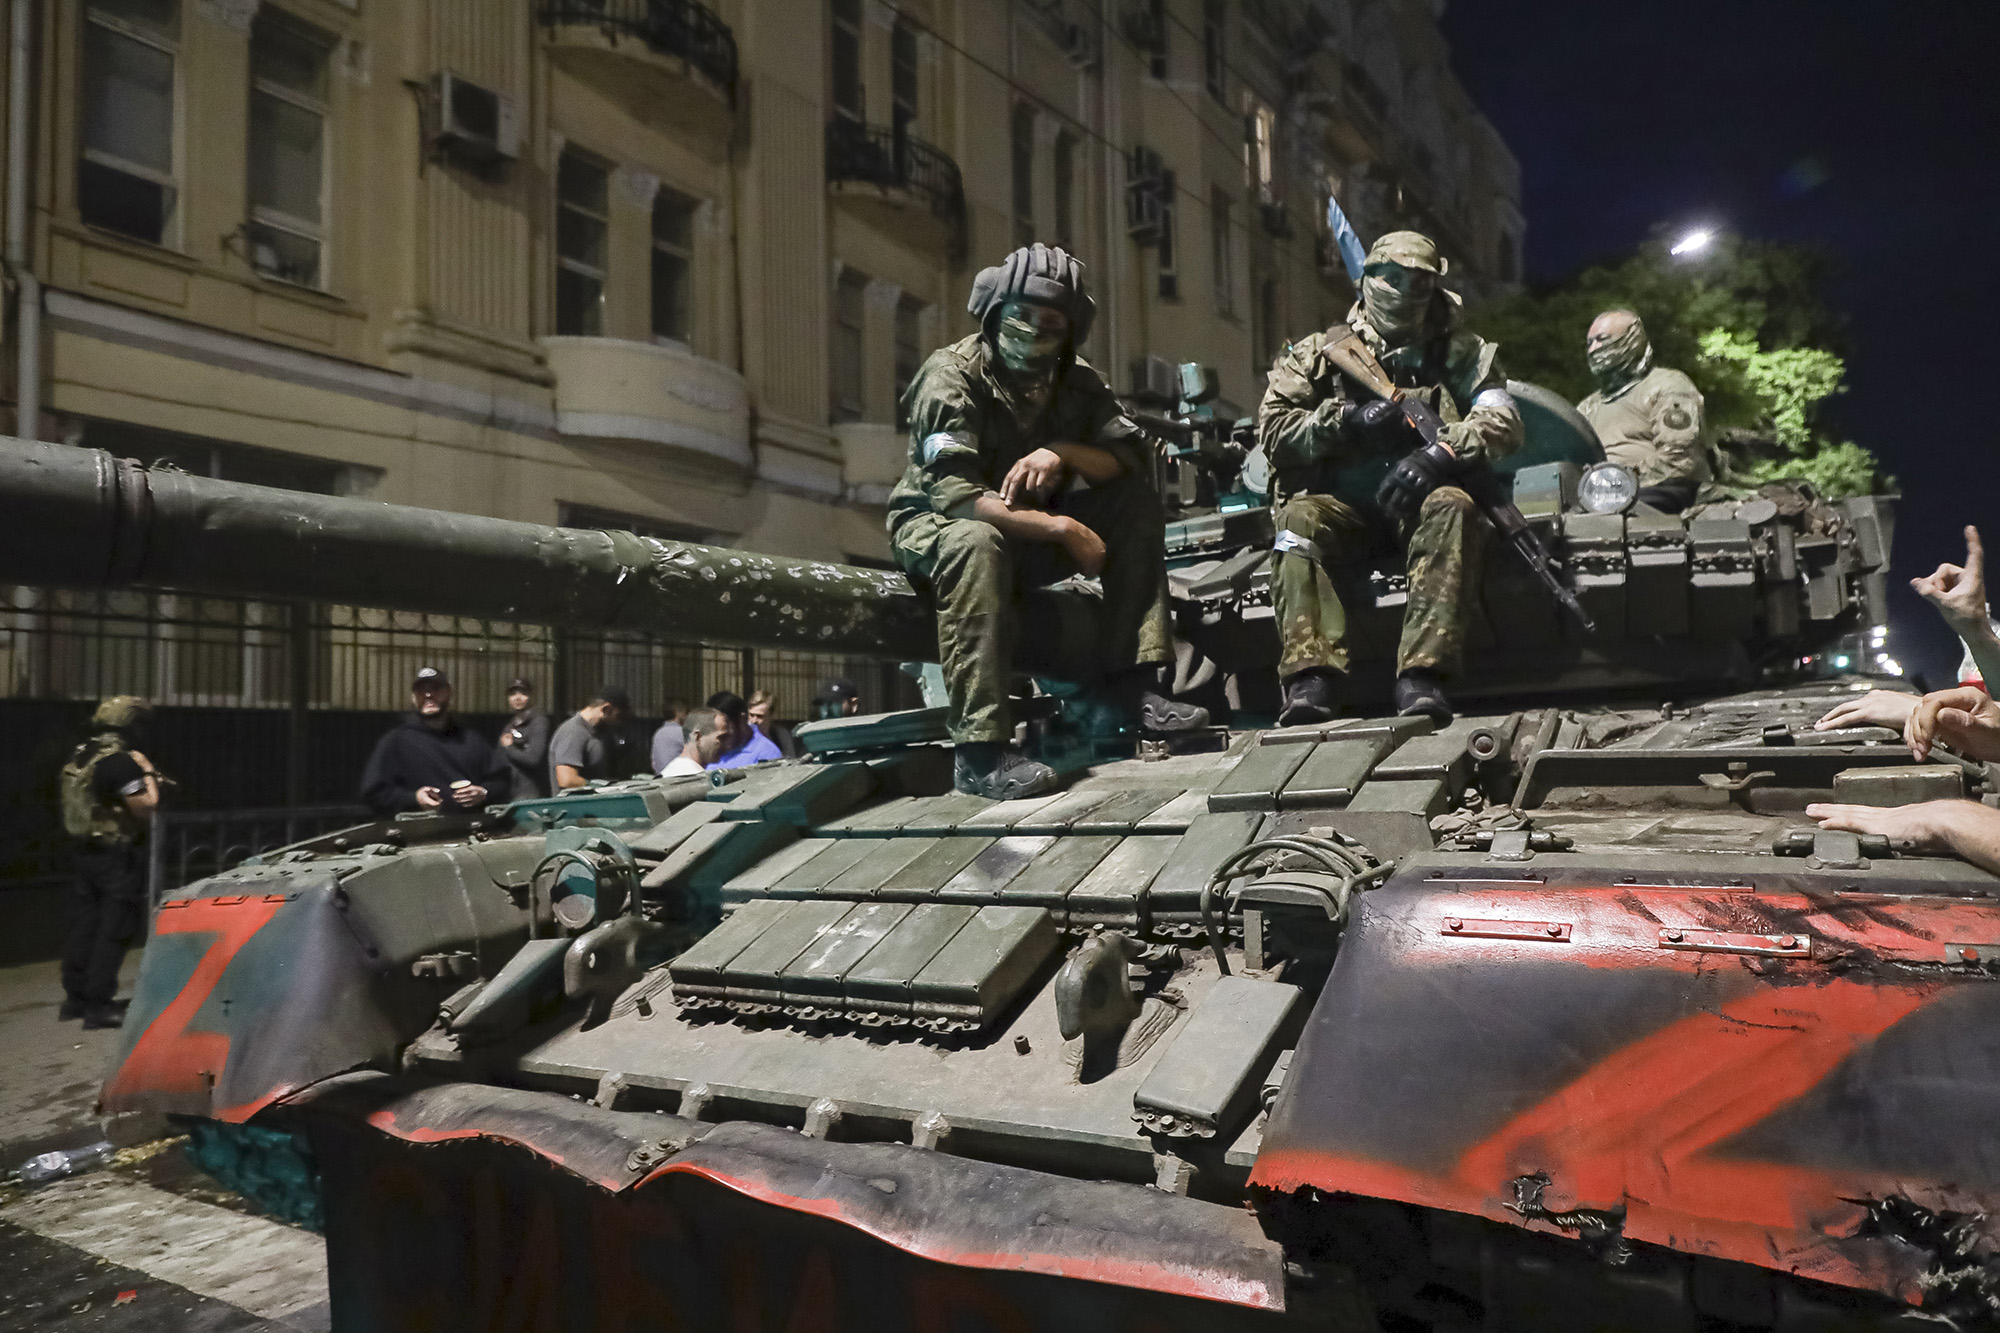 MembeRs of the Wagner Group military company sit atop of a tank on a street in Rostov-on-Don, Russia, on June 24.